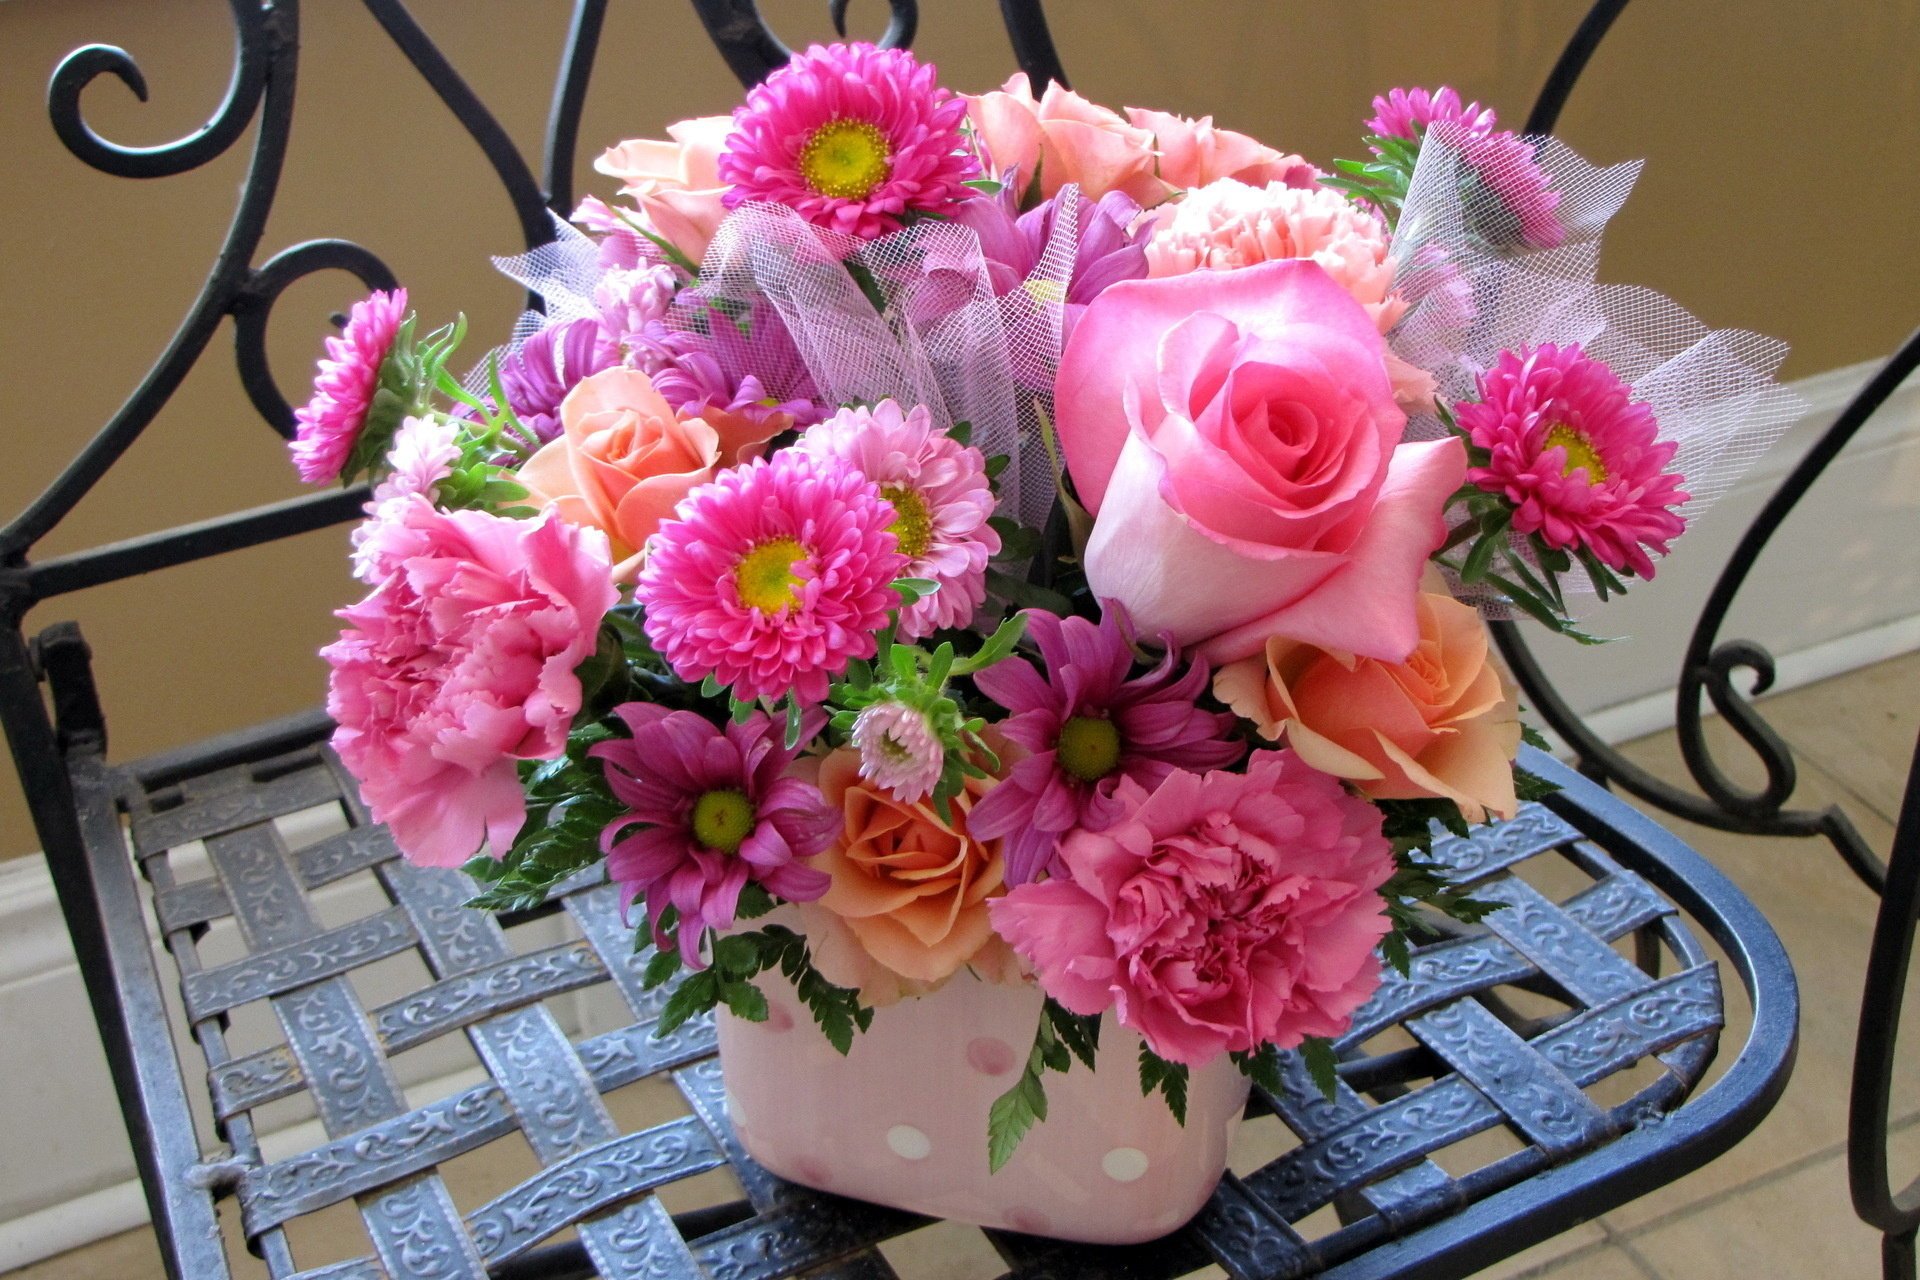 Bouquet of roses, carnations, chrysanthemums in pink